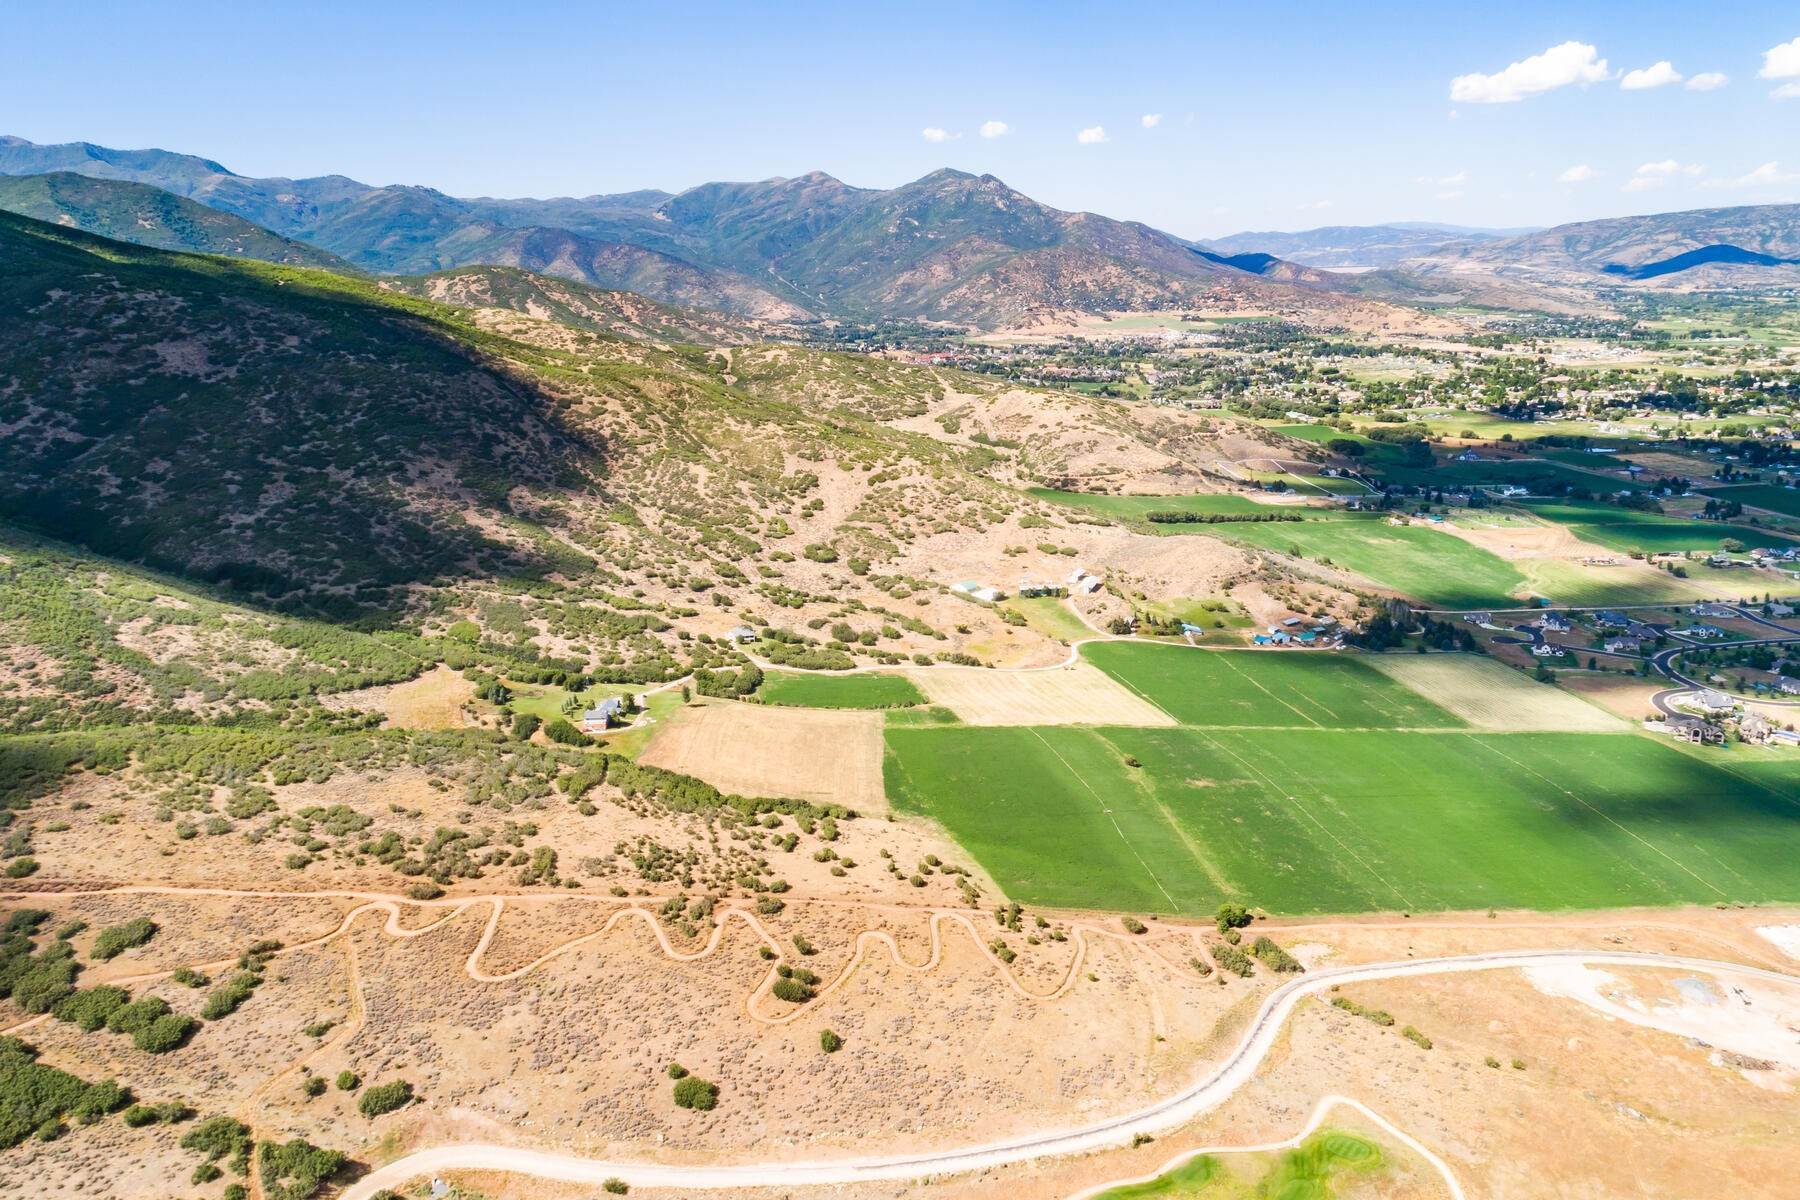 Land for Sale at 34 Acre Lot in Midway Overlooks Lake, Valley and Golf Course 978 S Upland Loop Midway, Utah 84049 United States